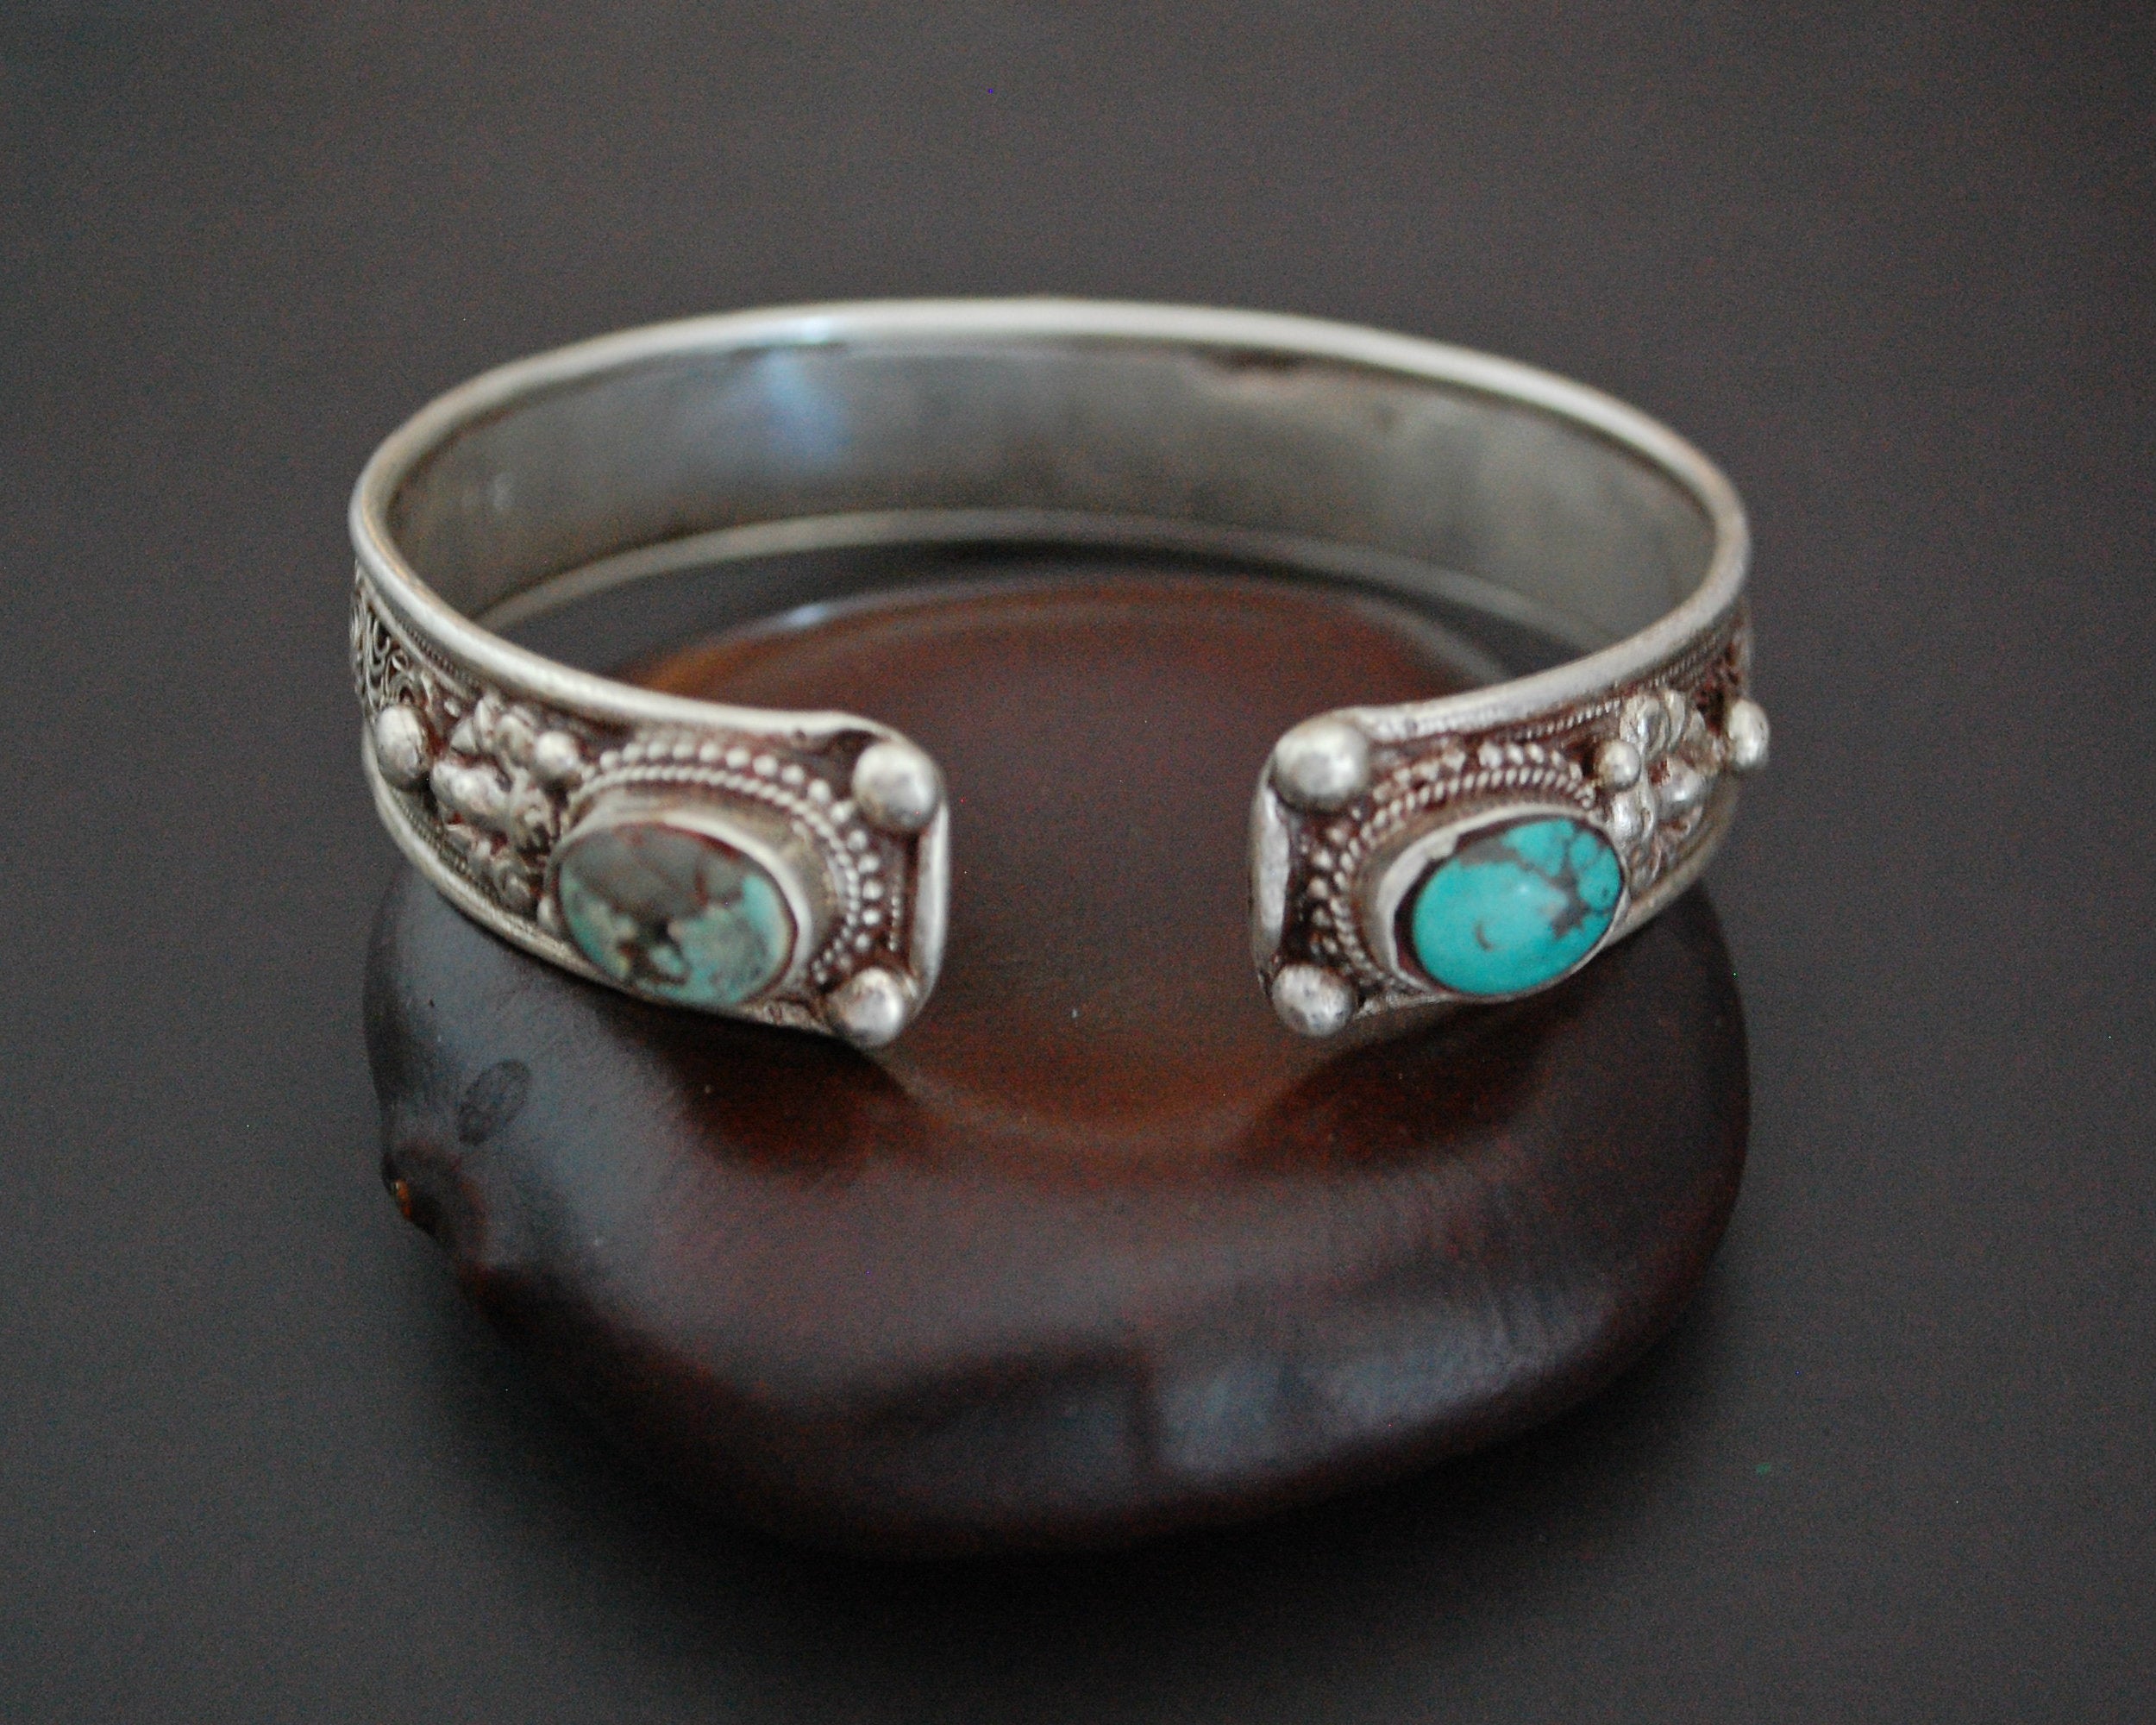 Nepali Coral Turquoise Cuff Bracelet with Filigree Work